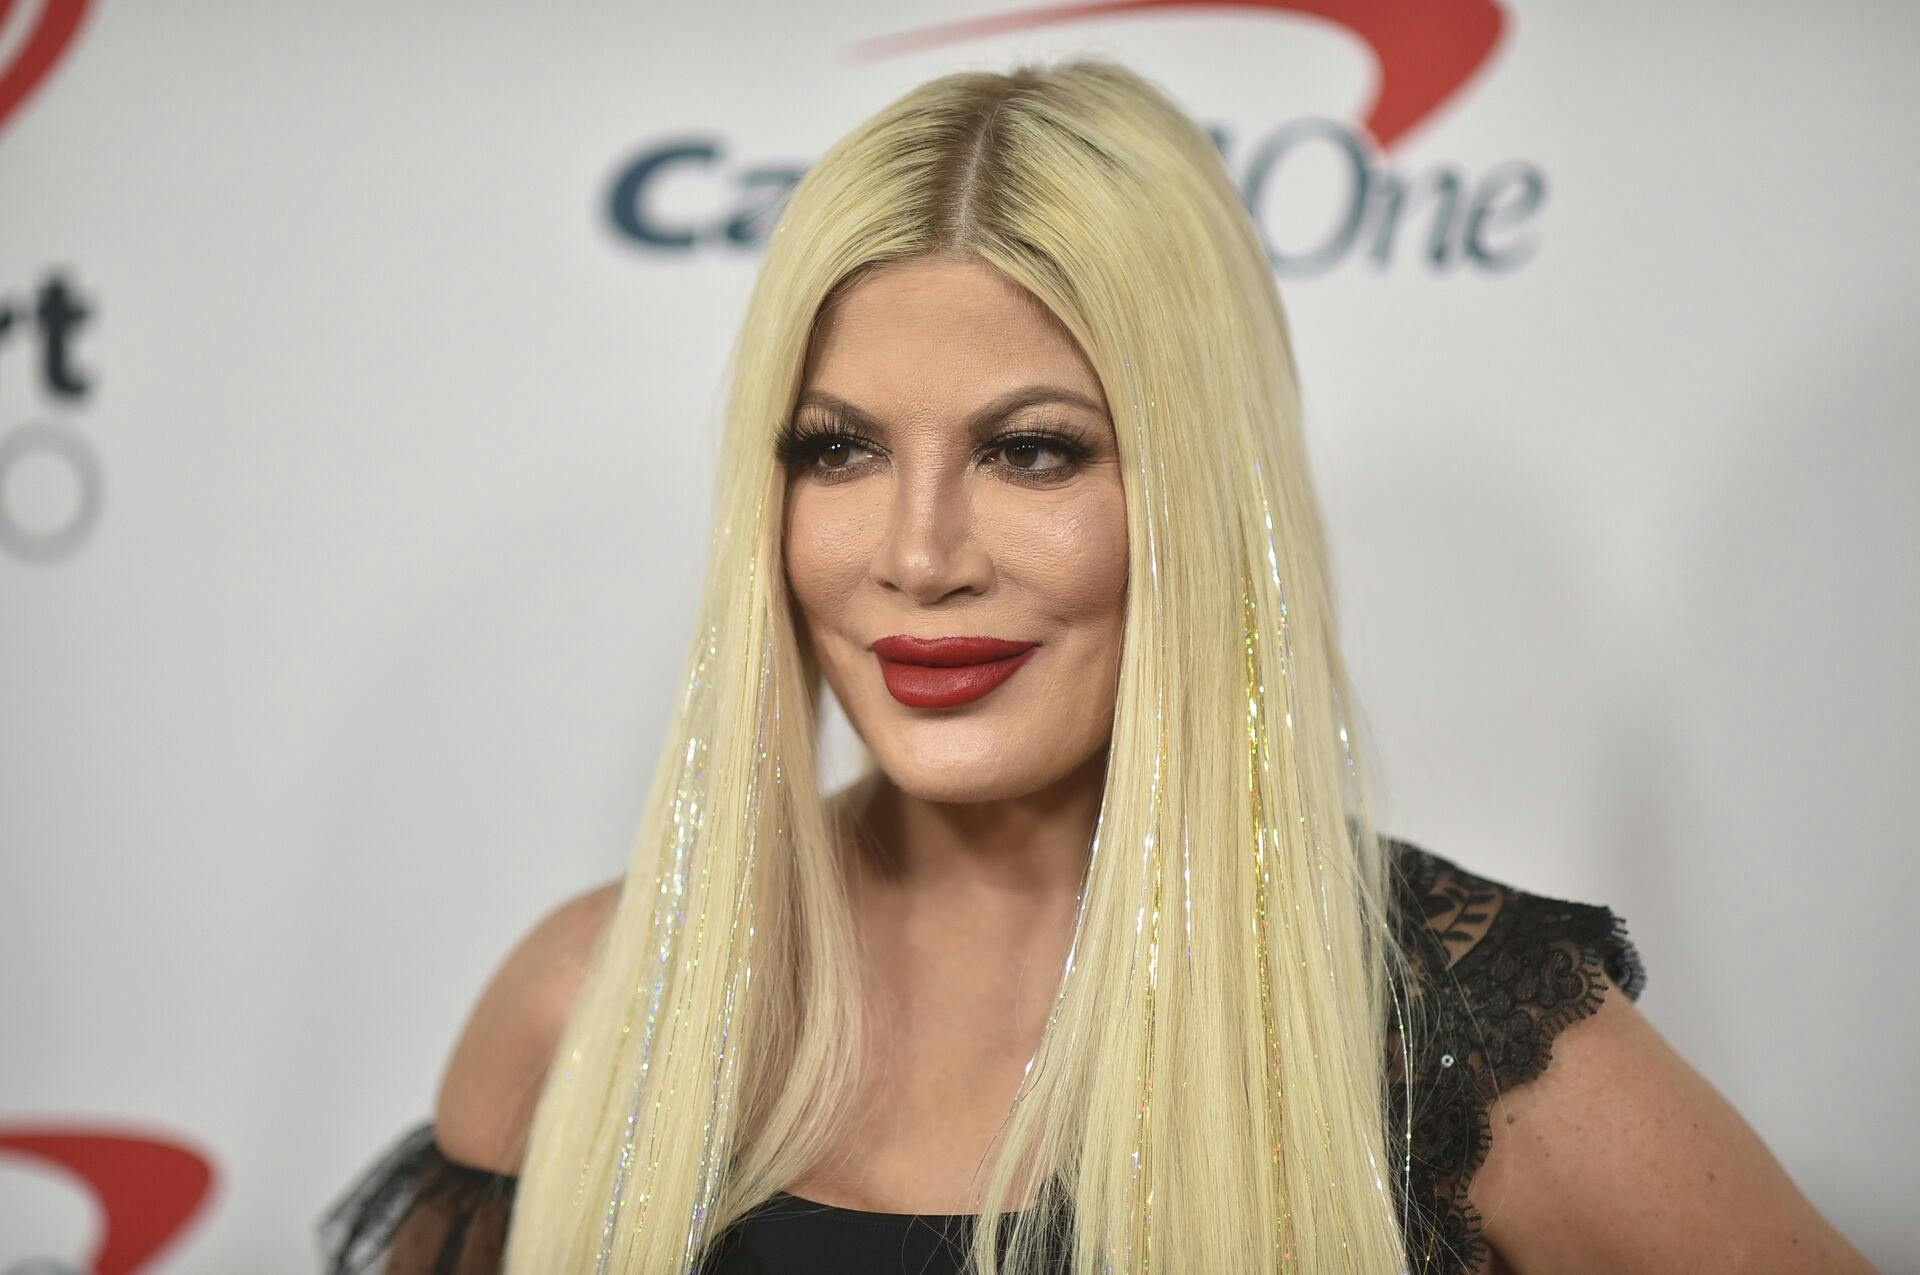 Tori Spelling arrives at the 2021 Jingle Ball Los Angeles at the Forum on Friday, Dec. 3, 2021, in Inglewood, Calif. (Photo by Richard Shotwell/Invision/AP)